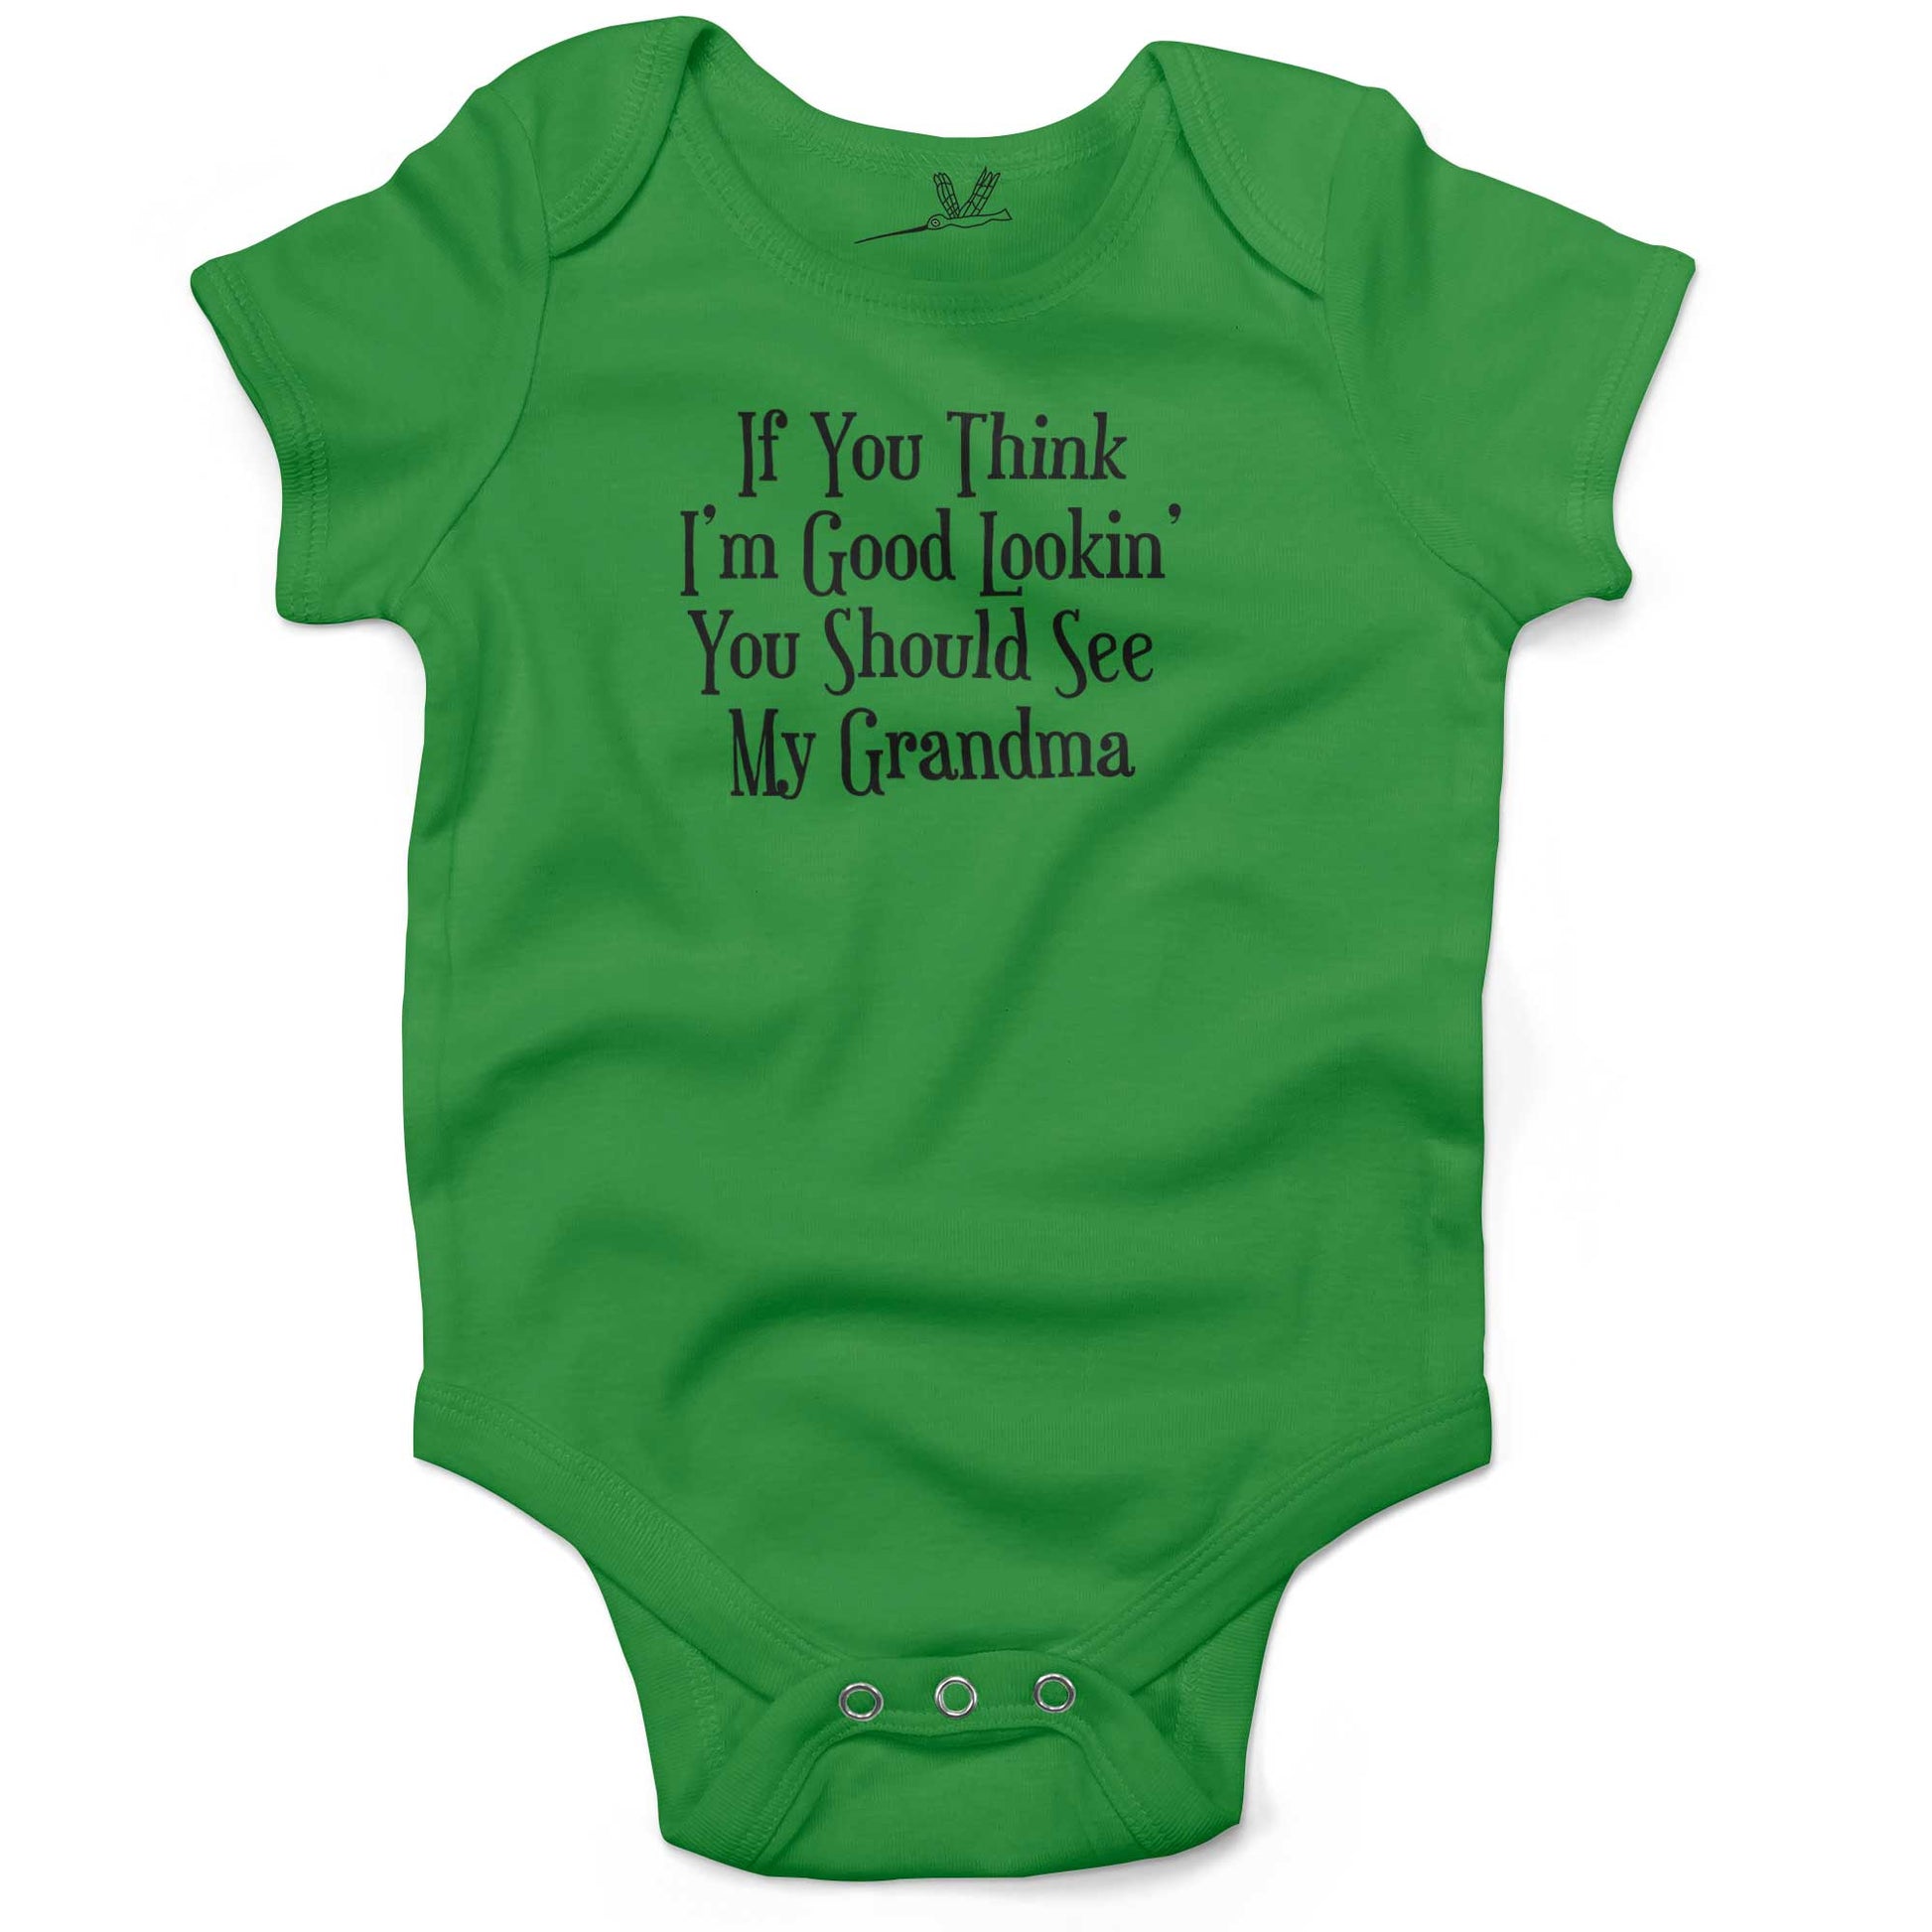 If You Think I'm Good Lookin', You Should See My Grandma Infant Bodysuit or Raglan Tee-Grass Green-3-6 months